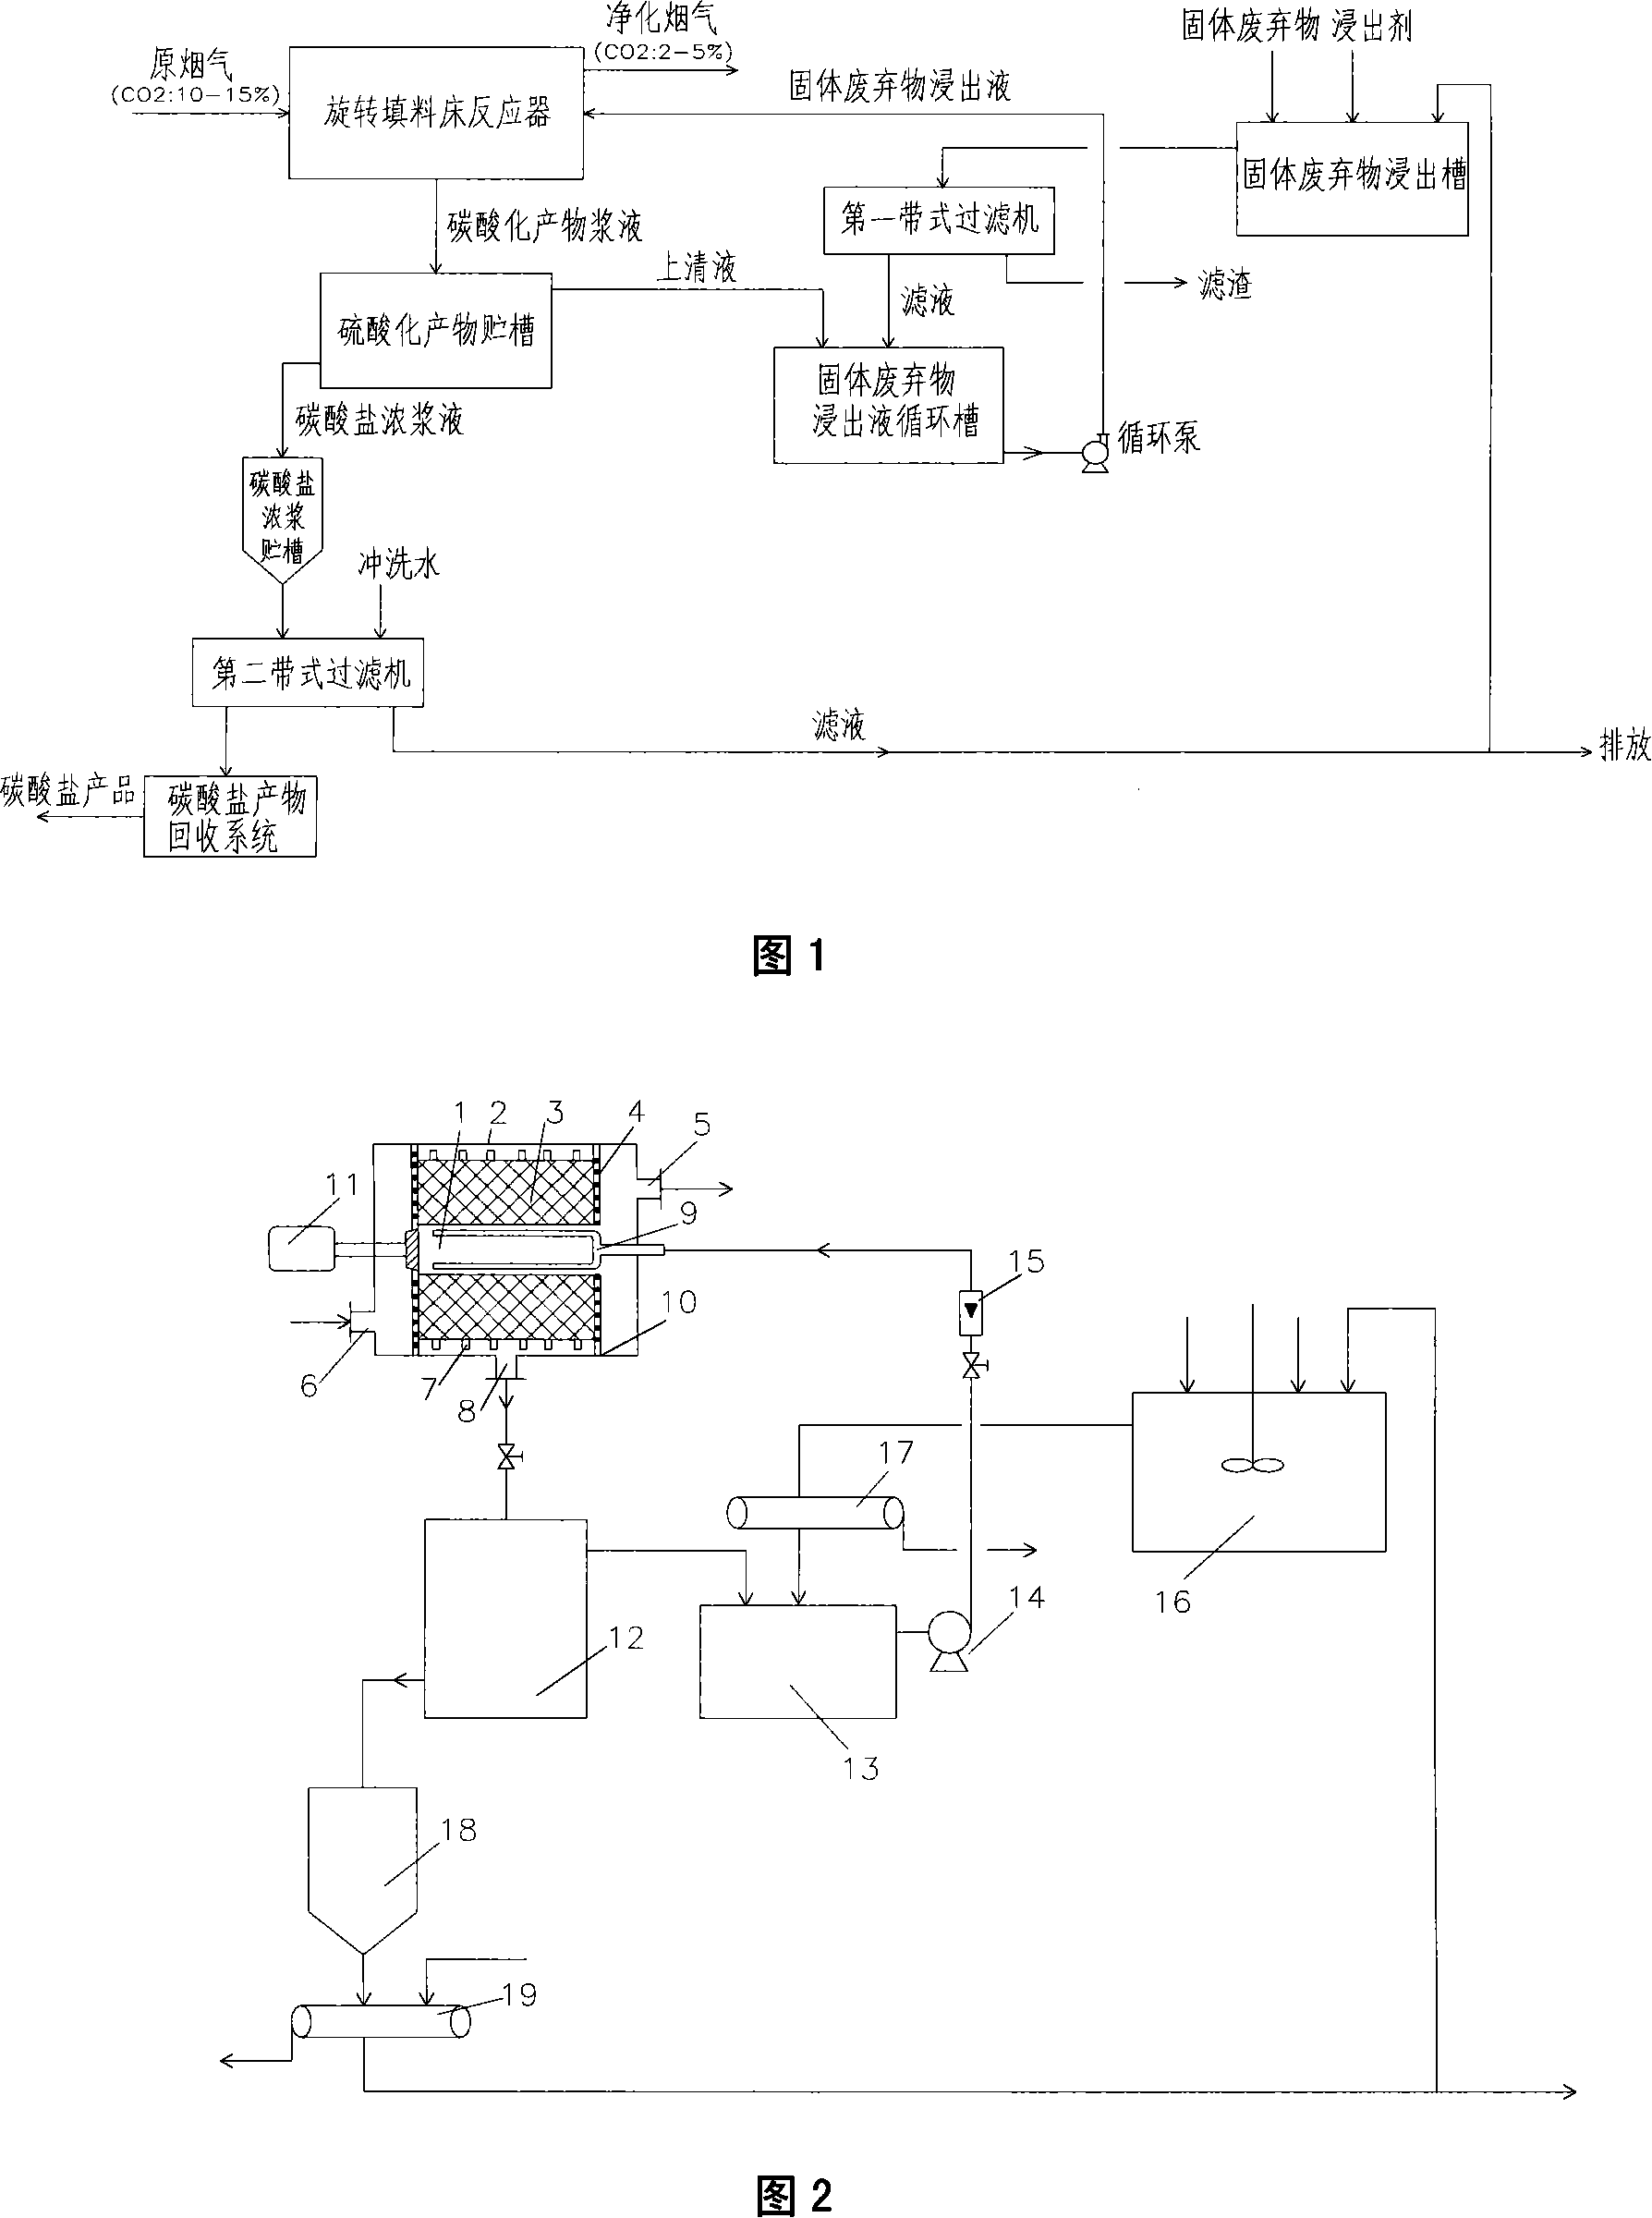 Method and device for fixing CO2 in stack gas by solid castoff carbonatation